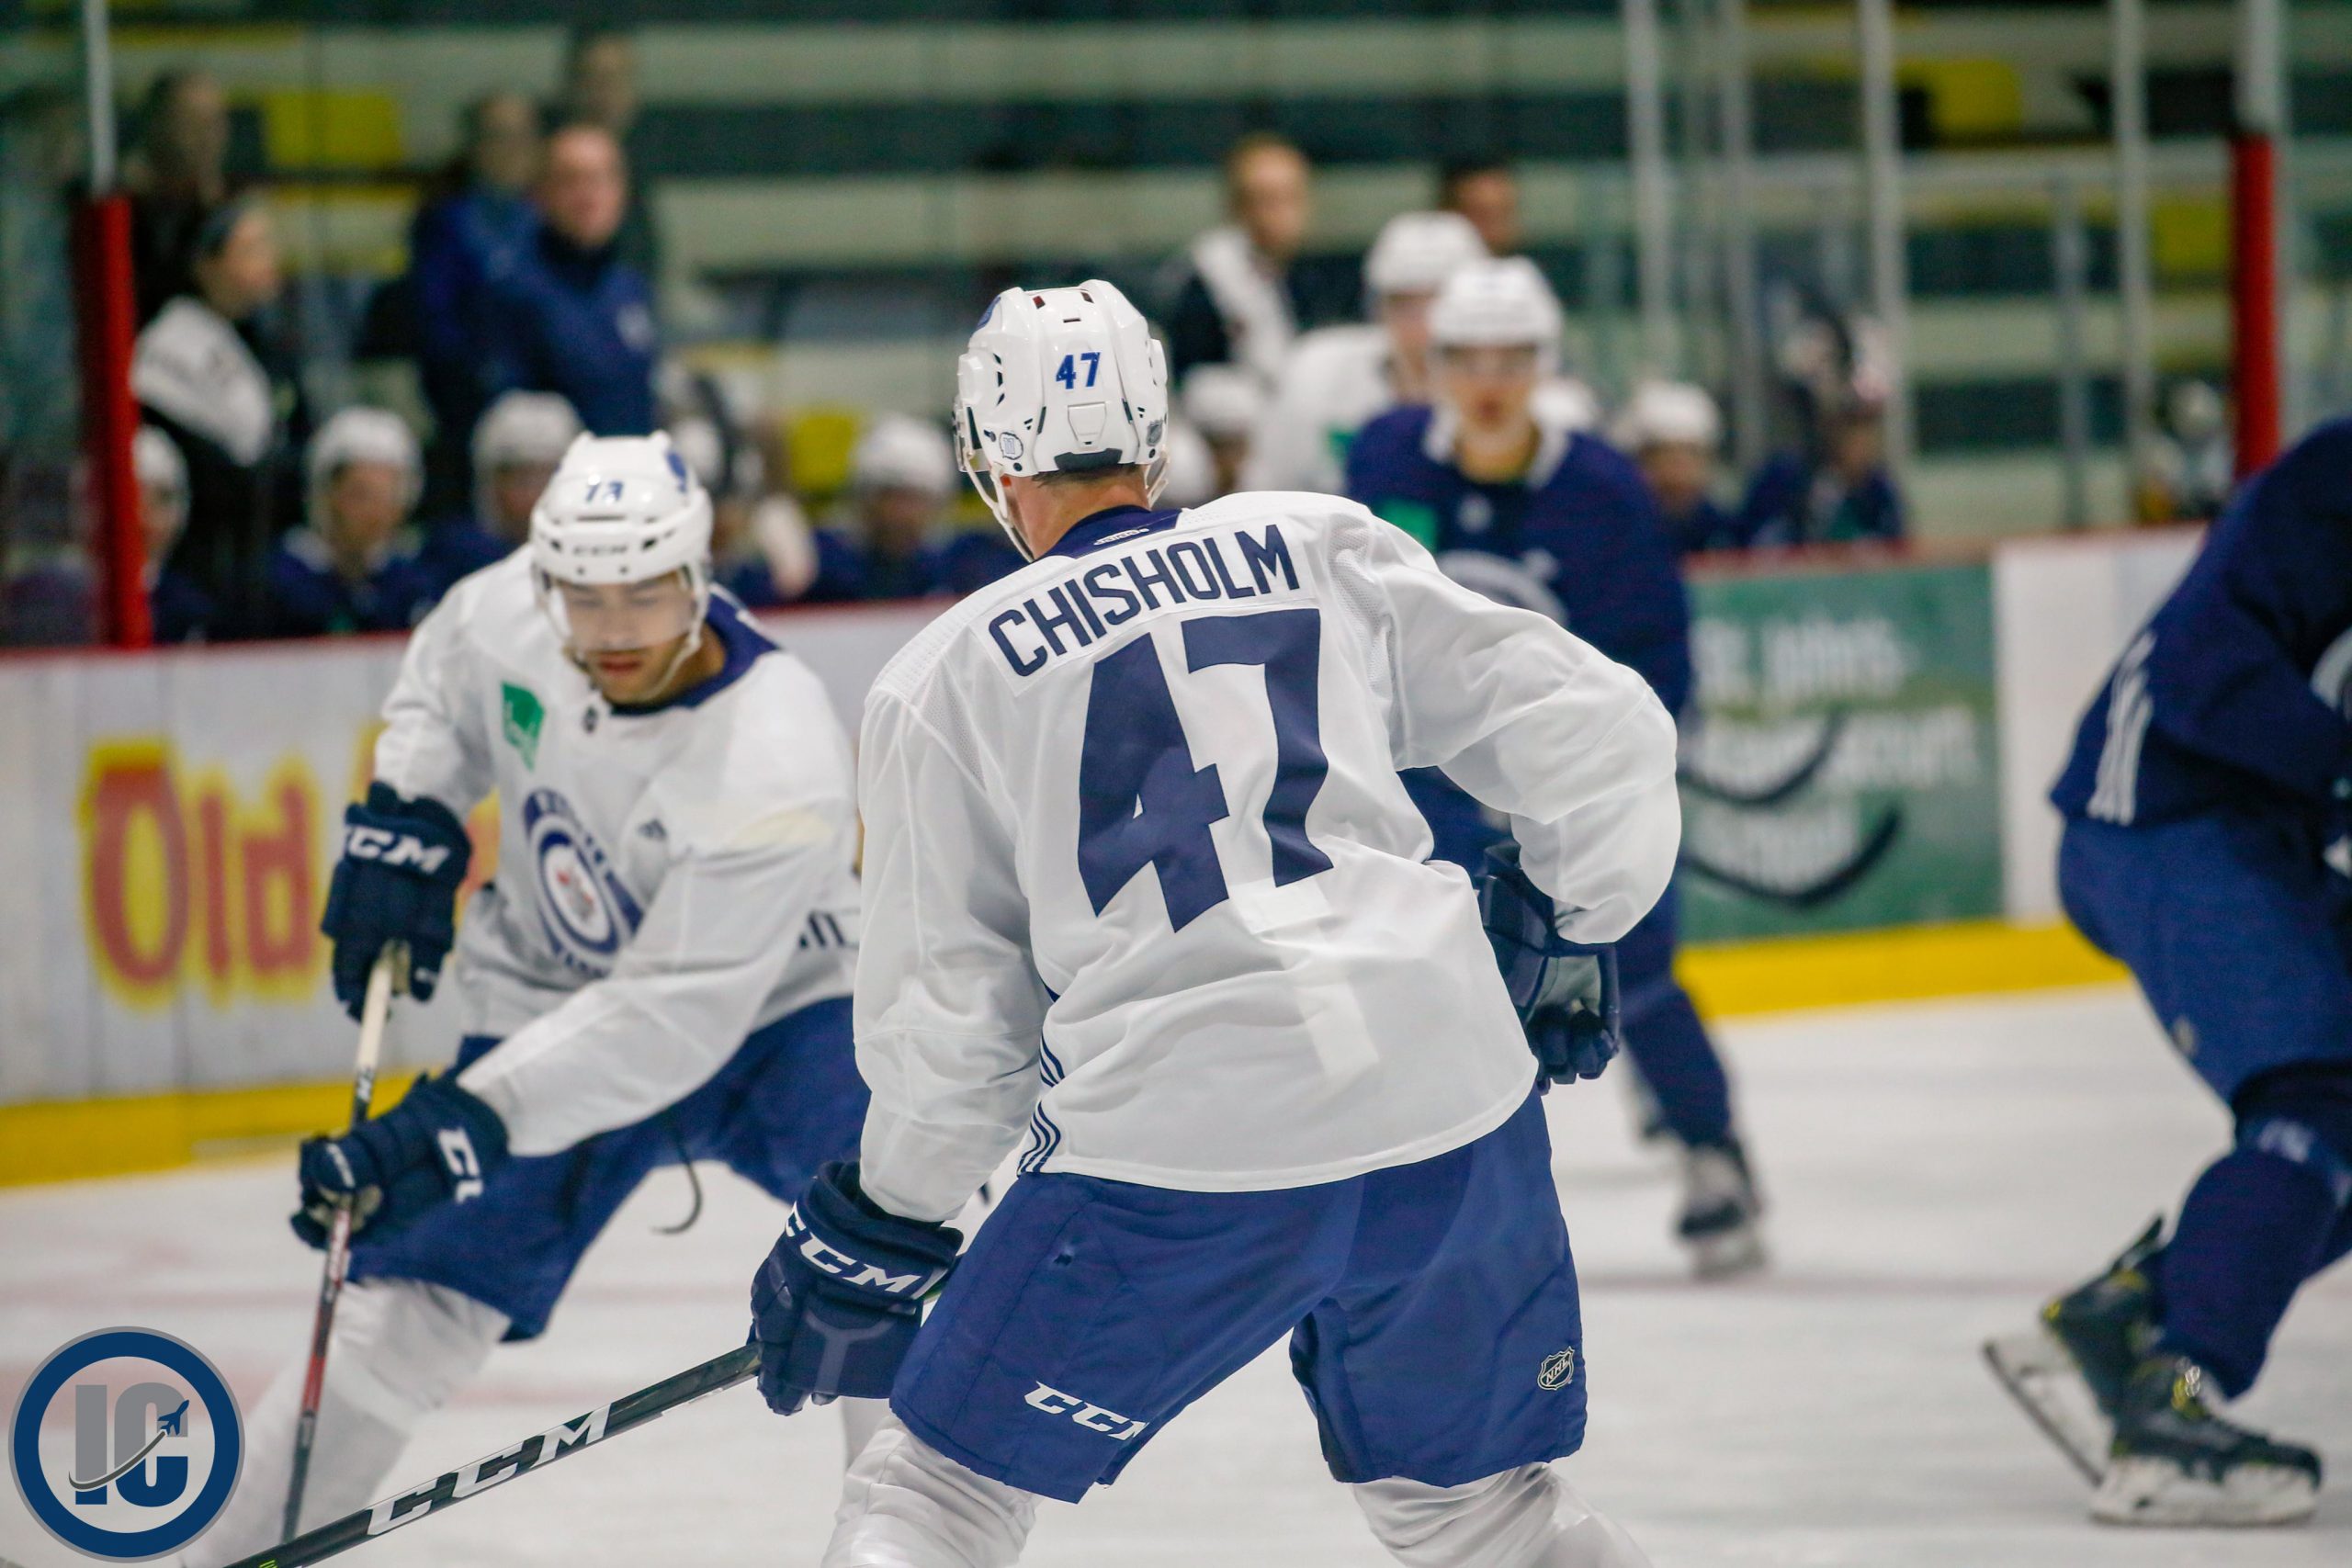 Chisholm at Development Camp scaled